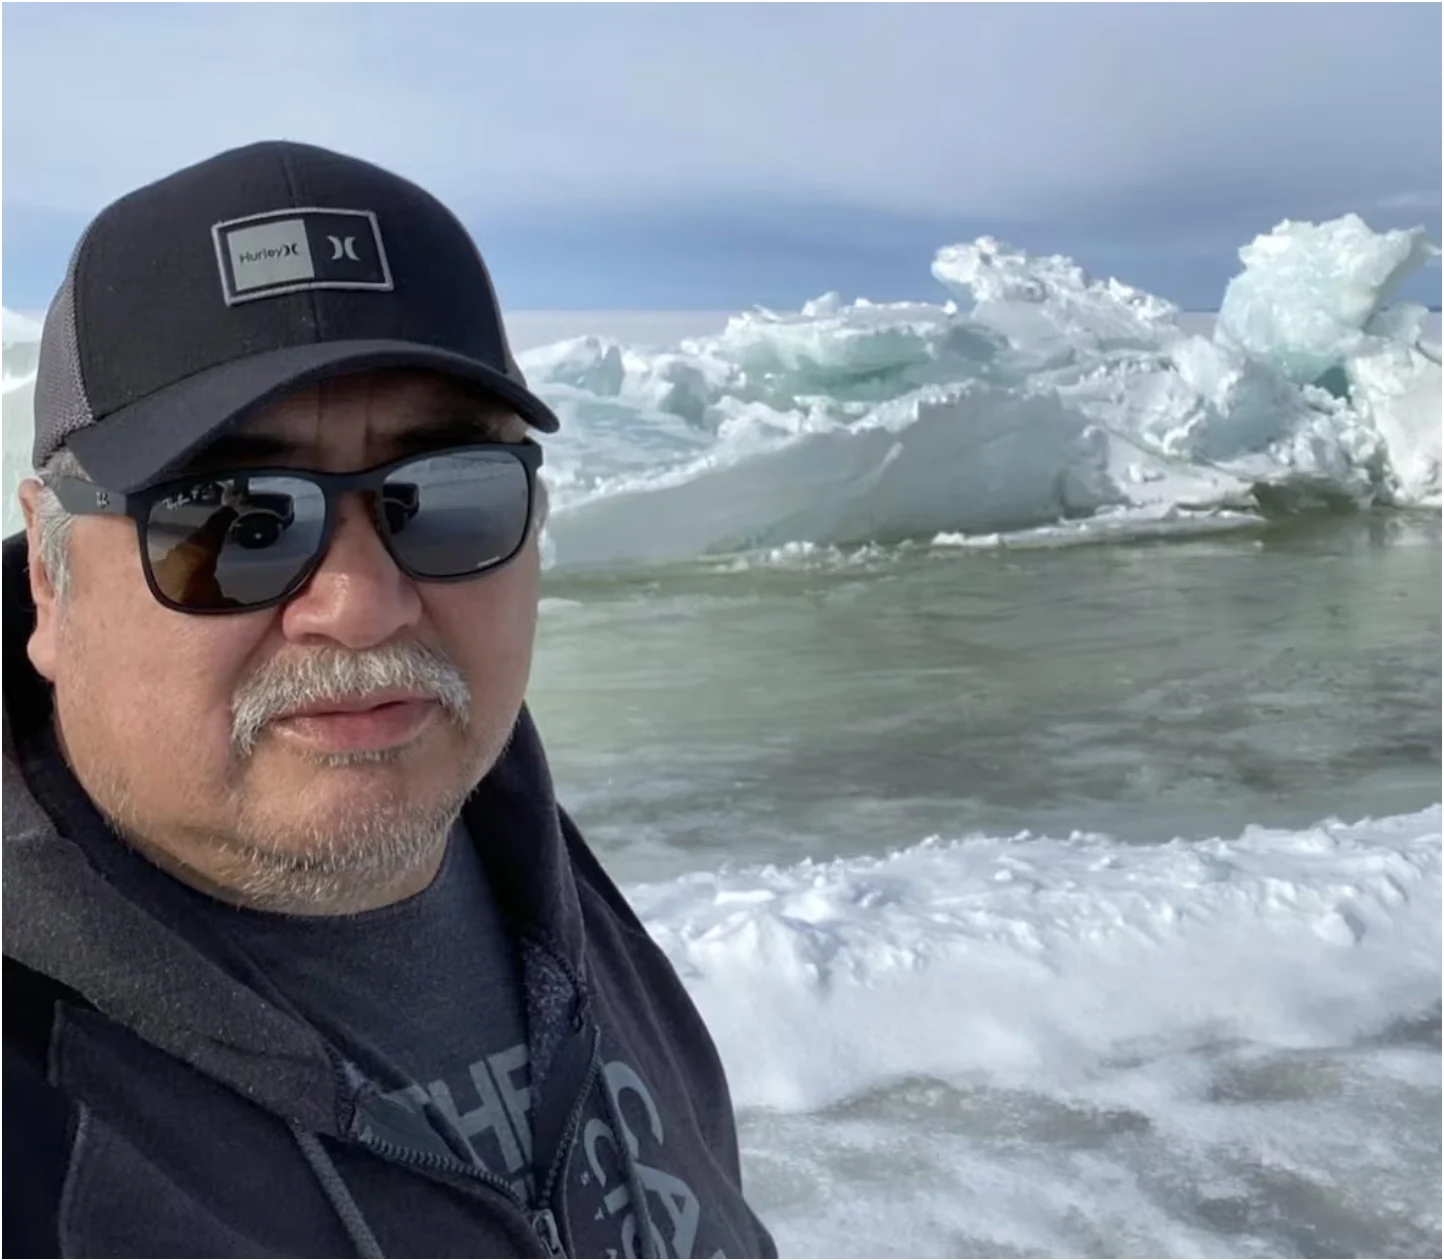 CBC: Victor Fern, a member of the Fond du Lac Denesuline First Nation, says he is concerned for his community as the already high grocery prices might skyrocket with the access to ice roads impacted. (Submitted by Victor Fern)